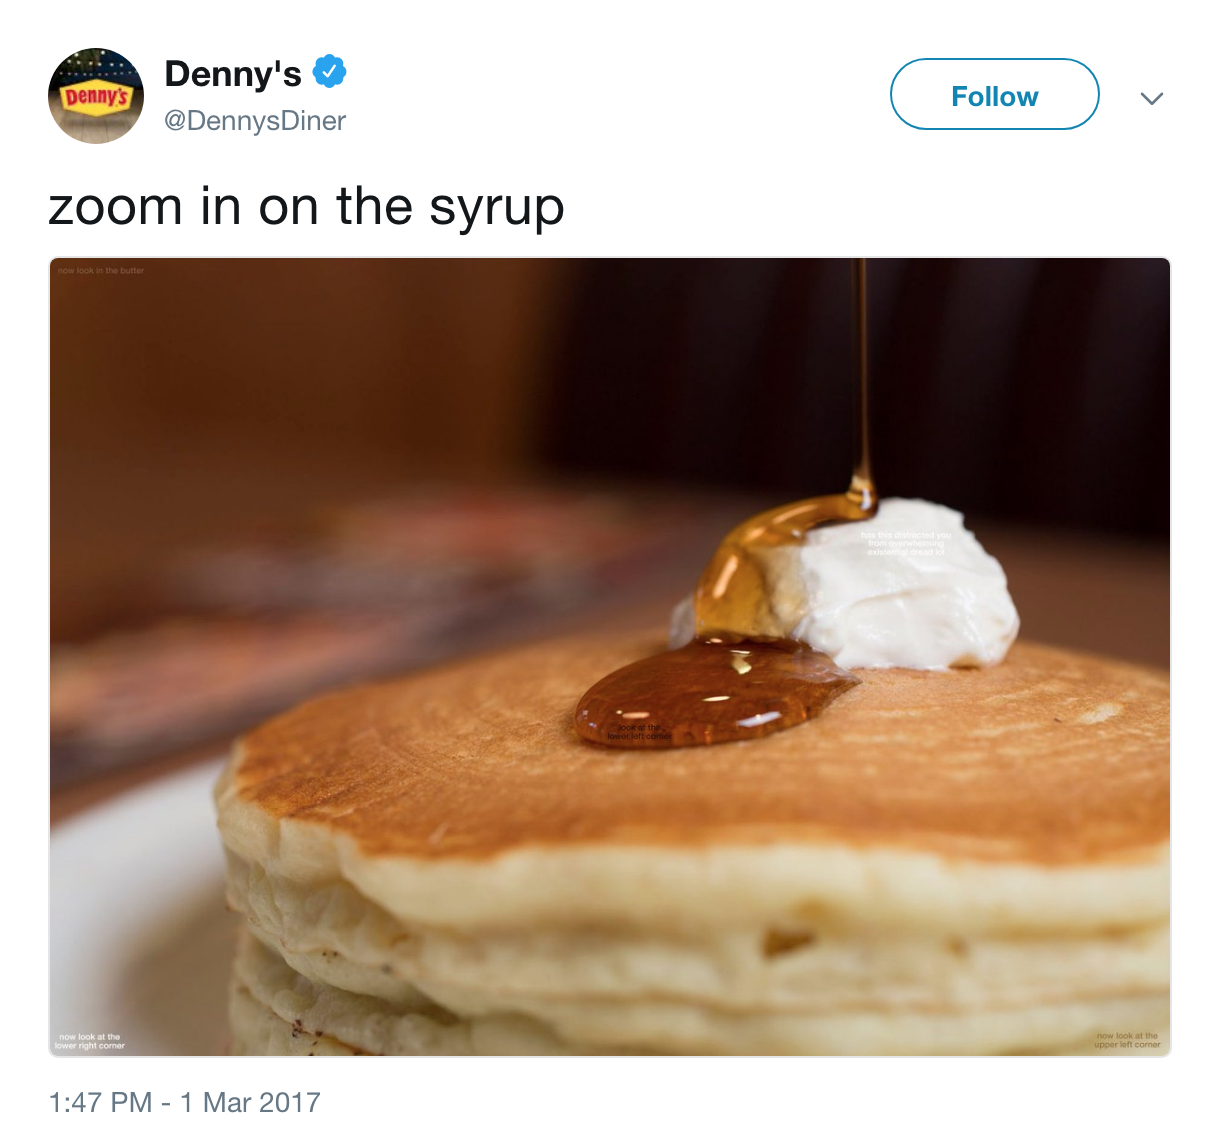 Denny created an interactive tweet that asked followers to participate in a meme